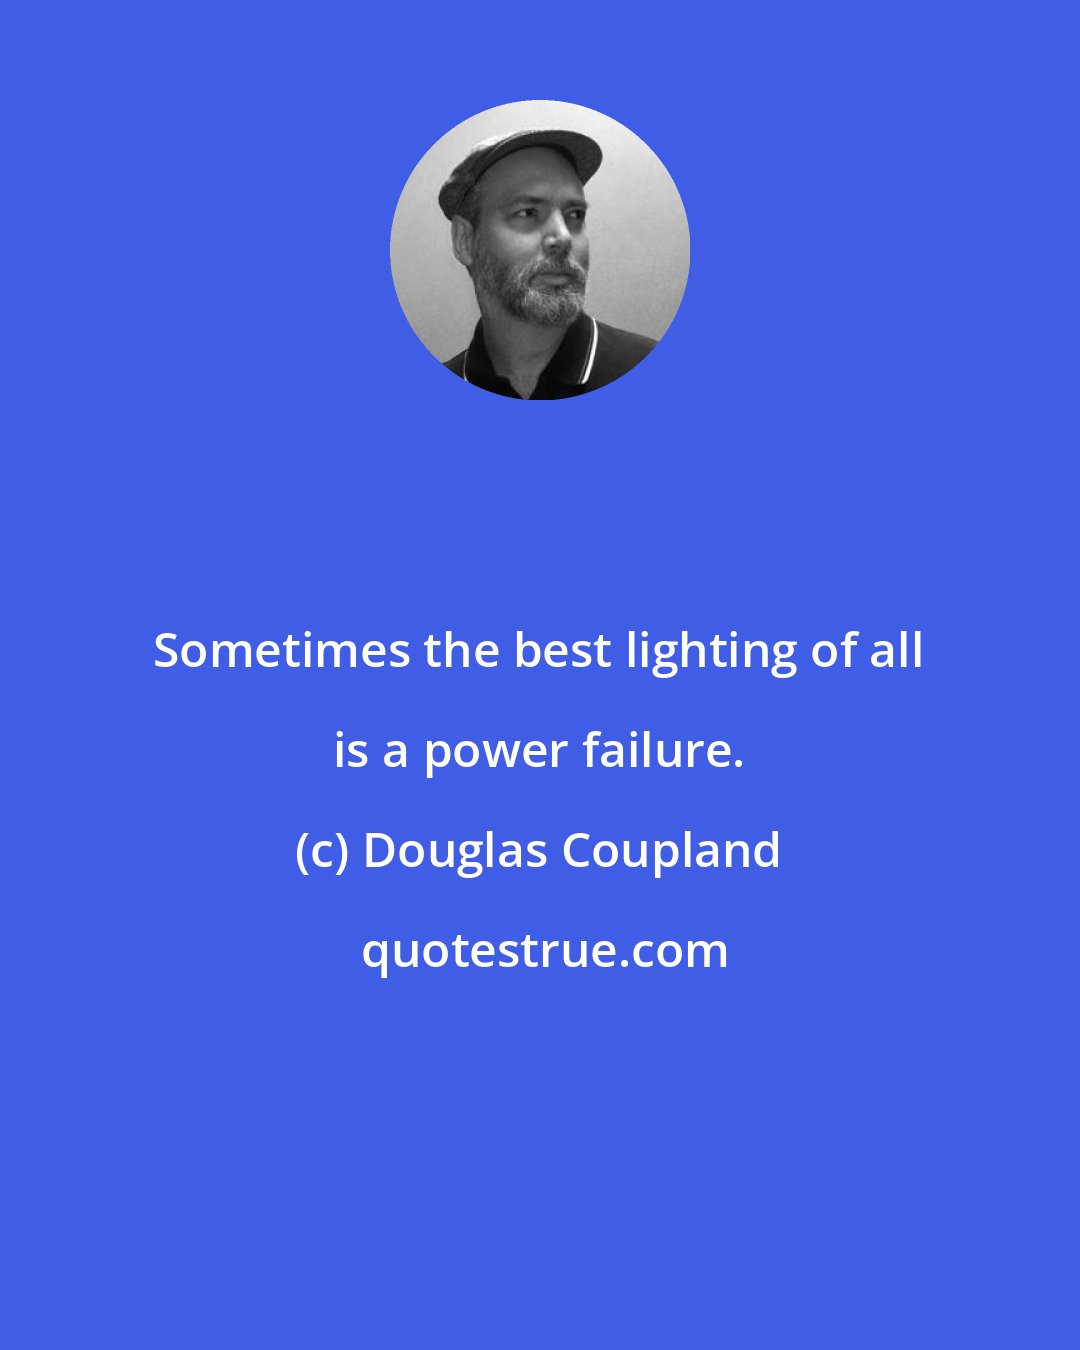 Douglas Coupland: Sometimes the best lighting of all is a power failure.